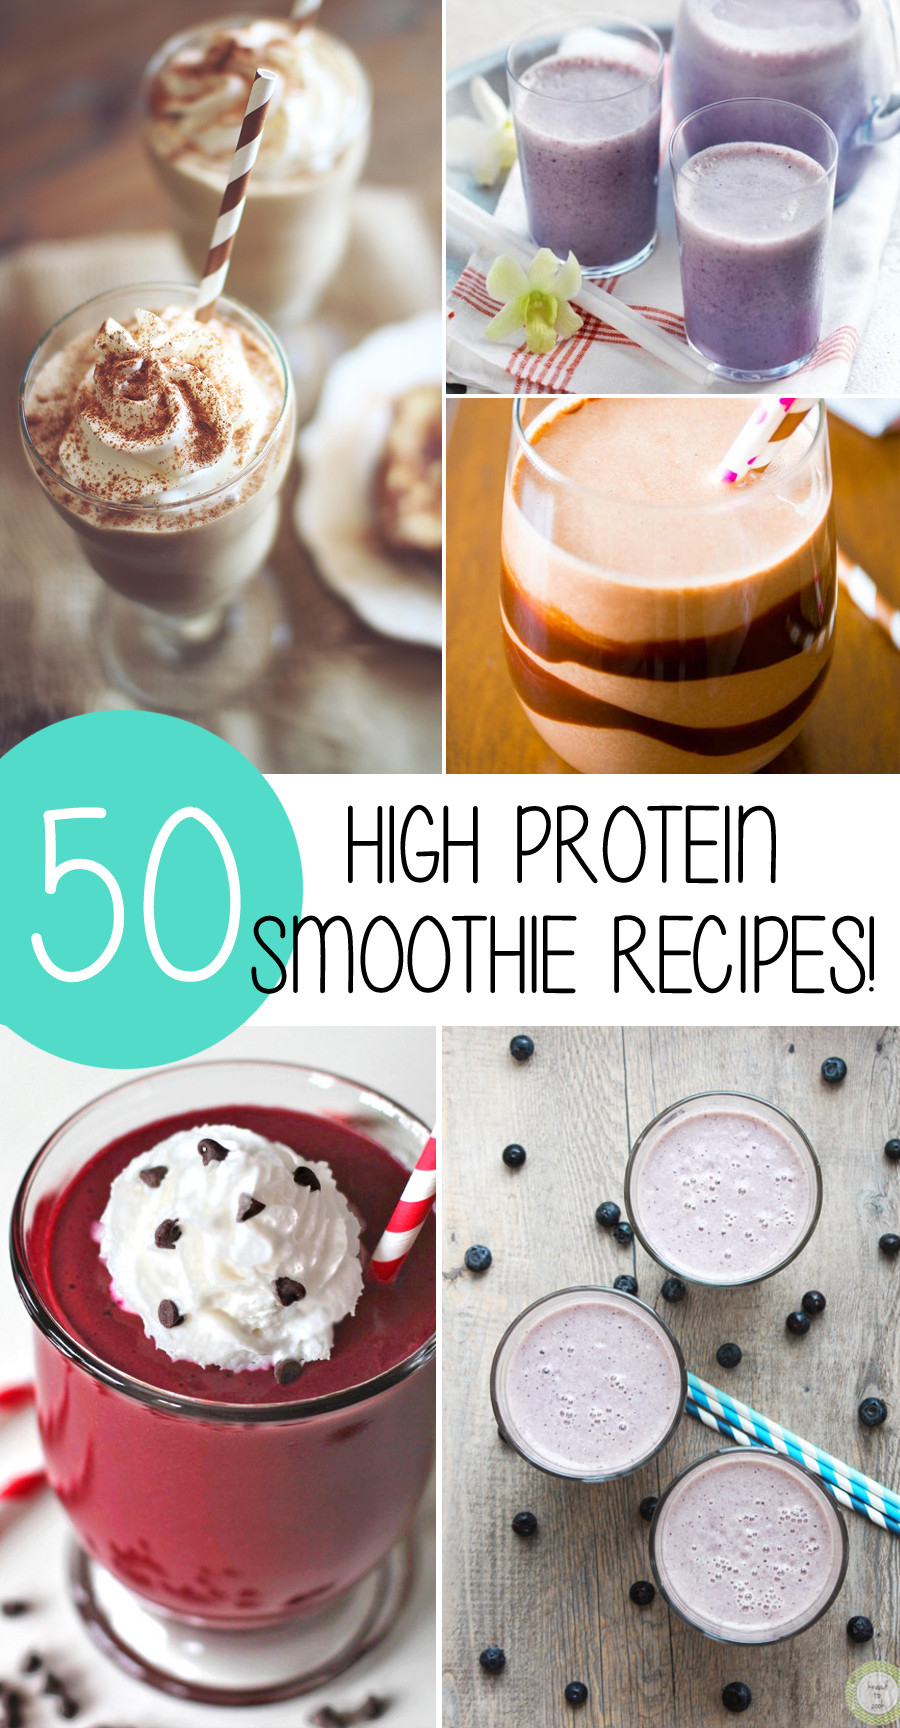 High Protein Smoothies
 50 High Protein Smoothie Recipes To Help You Lose Weight